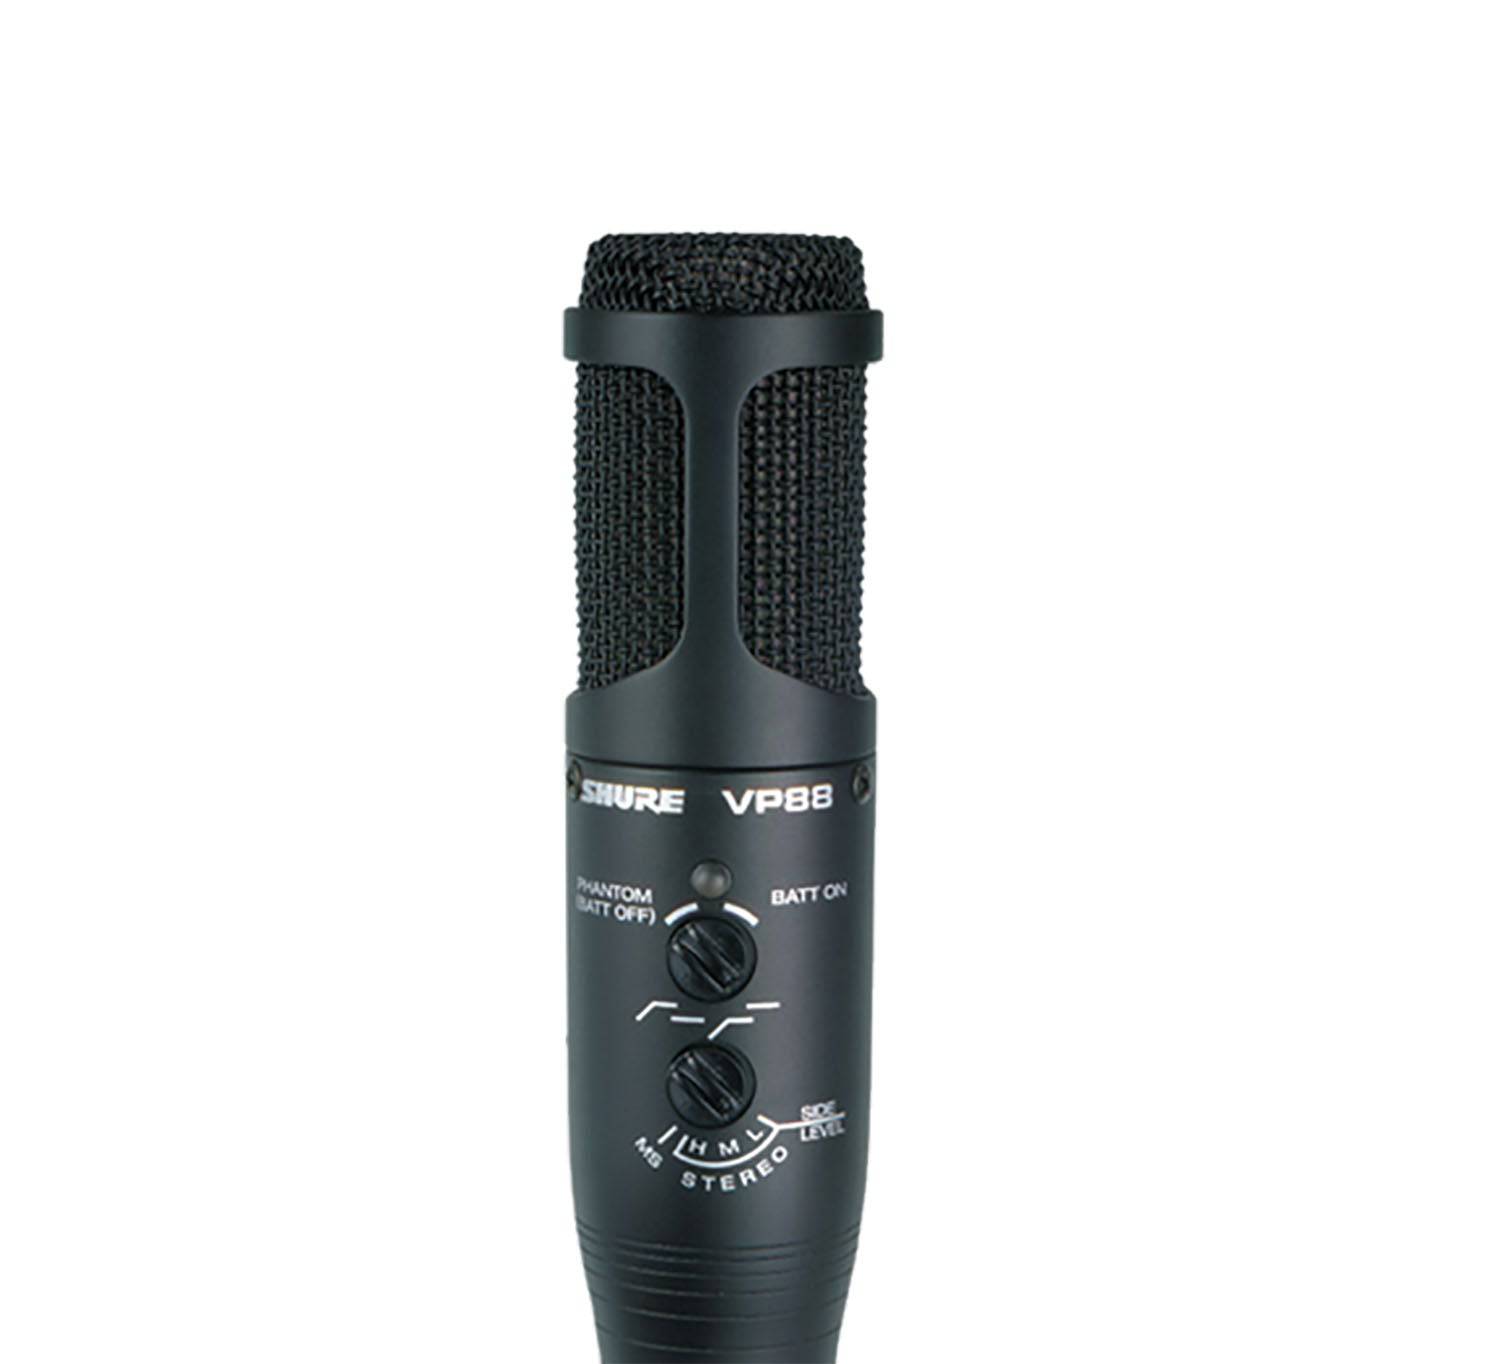 Shure VP88 Stereo Condenser Microphone with Internal Matrix, Battery Included - Hollywood DJ